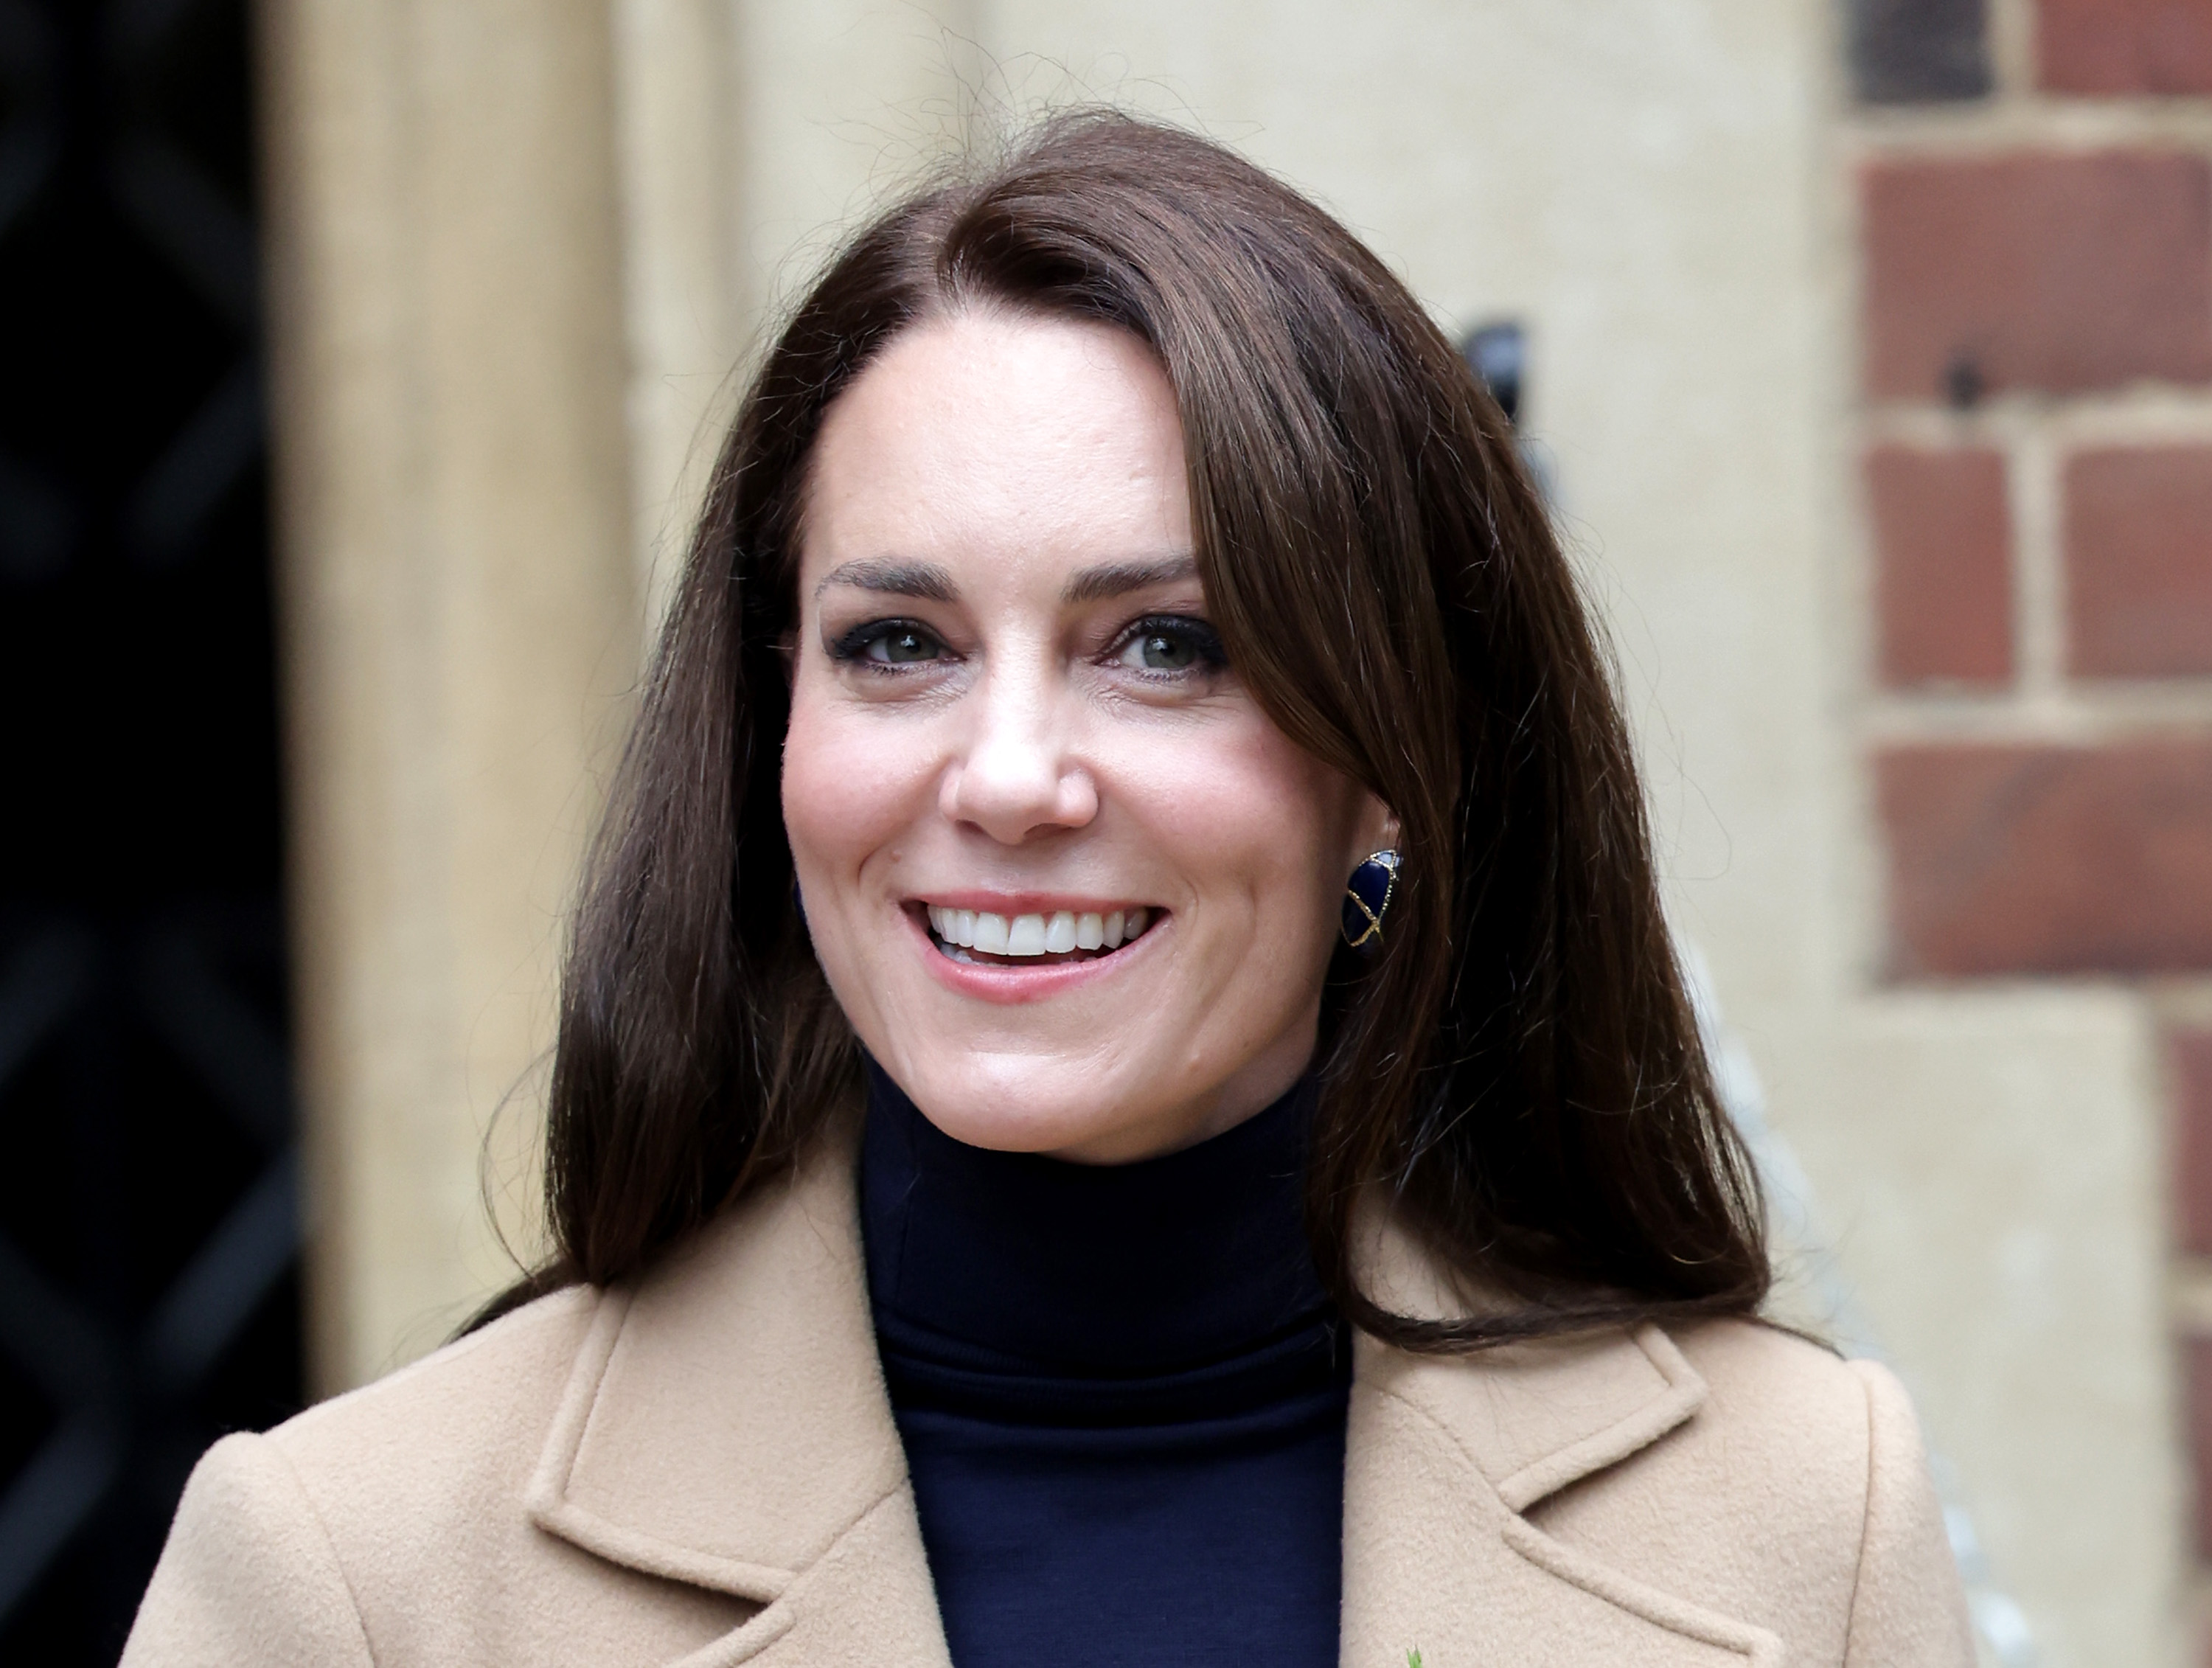 Princess Catherine visiting Oxford House Nursing Home in Slough, England on February 21, 2023 | Source: Getty Images